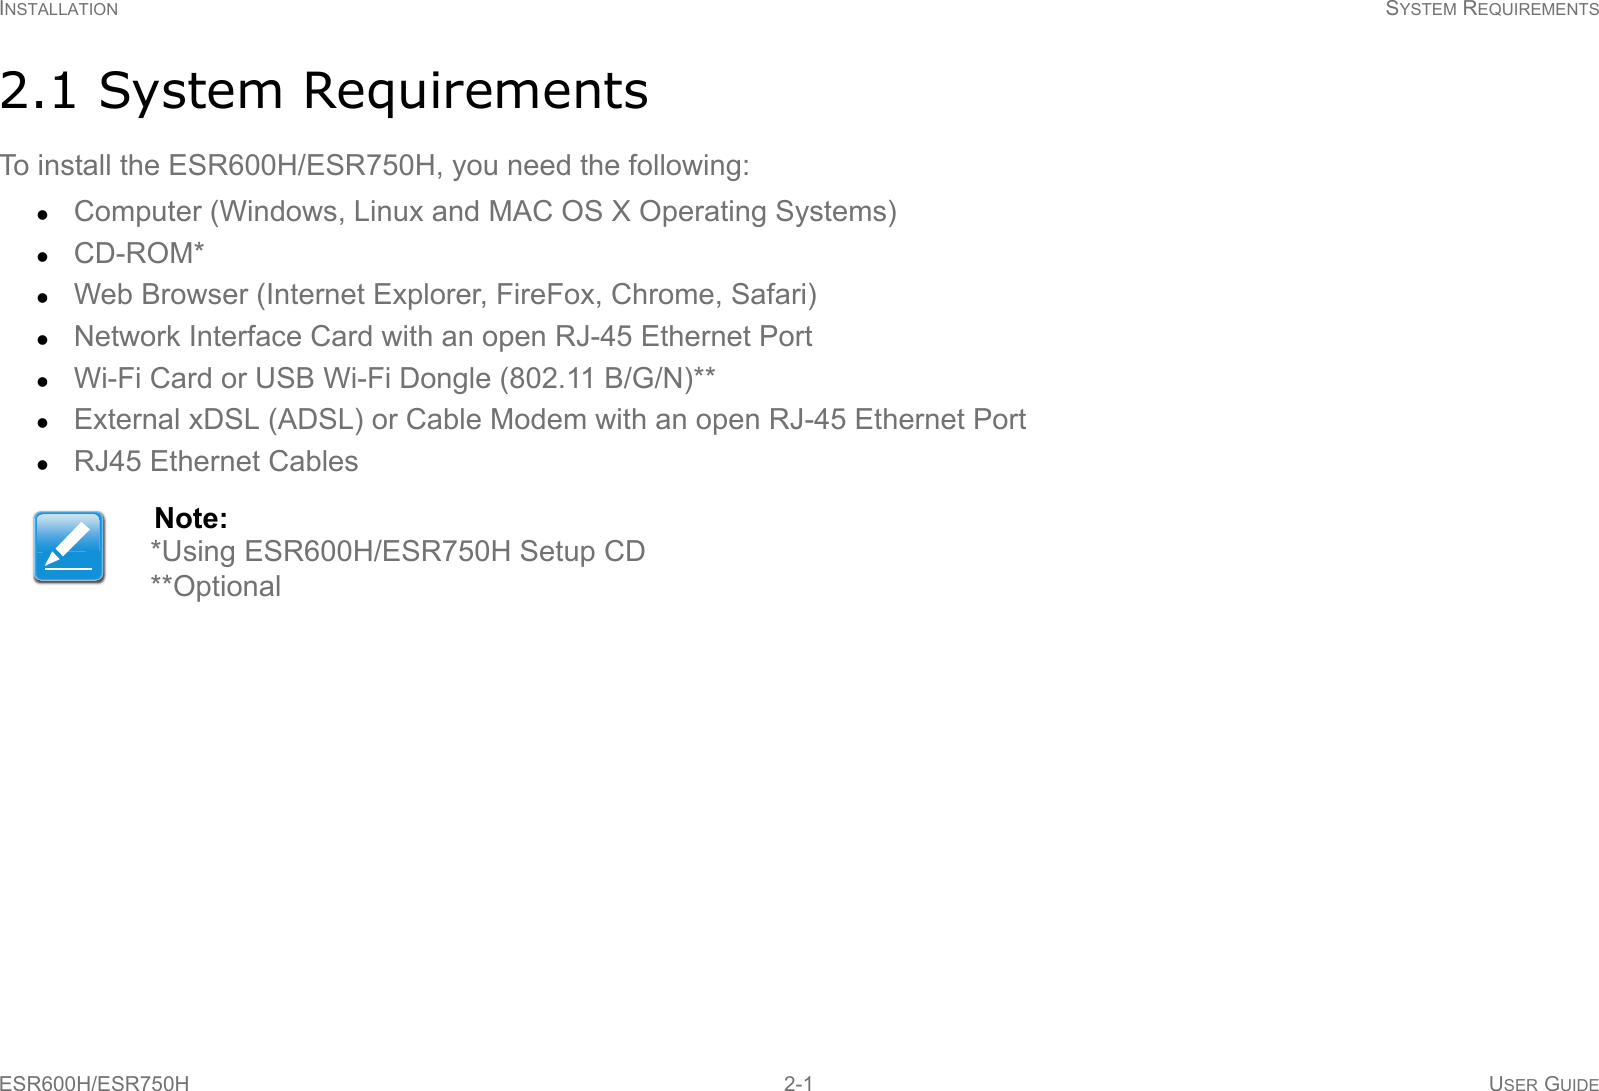 INSTALLATION SYSTEM REQUIREMENTSESR600H/ESR750H 2-1 USER GUIDE2.1 System RequirementsTo install the ESR600H/ESR750H, you need the following:Computer (Windows, Linux and MAC OS X Operating Systems)CD-ROM*Web Browser (Internet Explorer, FireFox, Chrome, Safari)Network Interface Card with an open RJ-45 Ethernet PortWi-Fi Card or USB Wi-Fi Dongle (802.11 B/G/N)**External xDSL (ADSL) or Cable Modem with an open RJ-45 Ethernet PortRJ45 Ethernet CablesNote:*Using ESR600H/ESR750H Setup CD**Optional